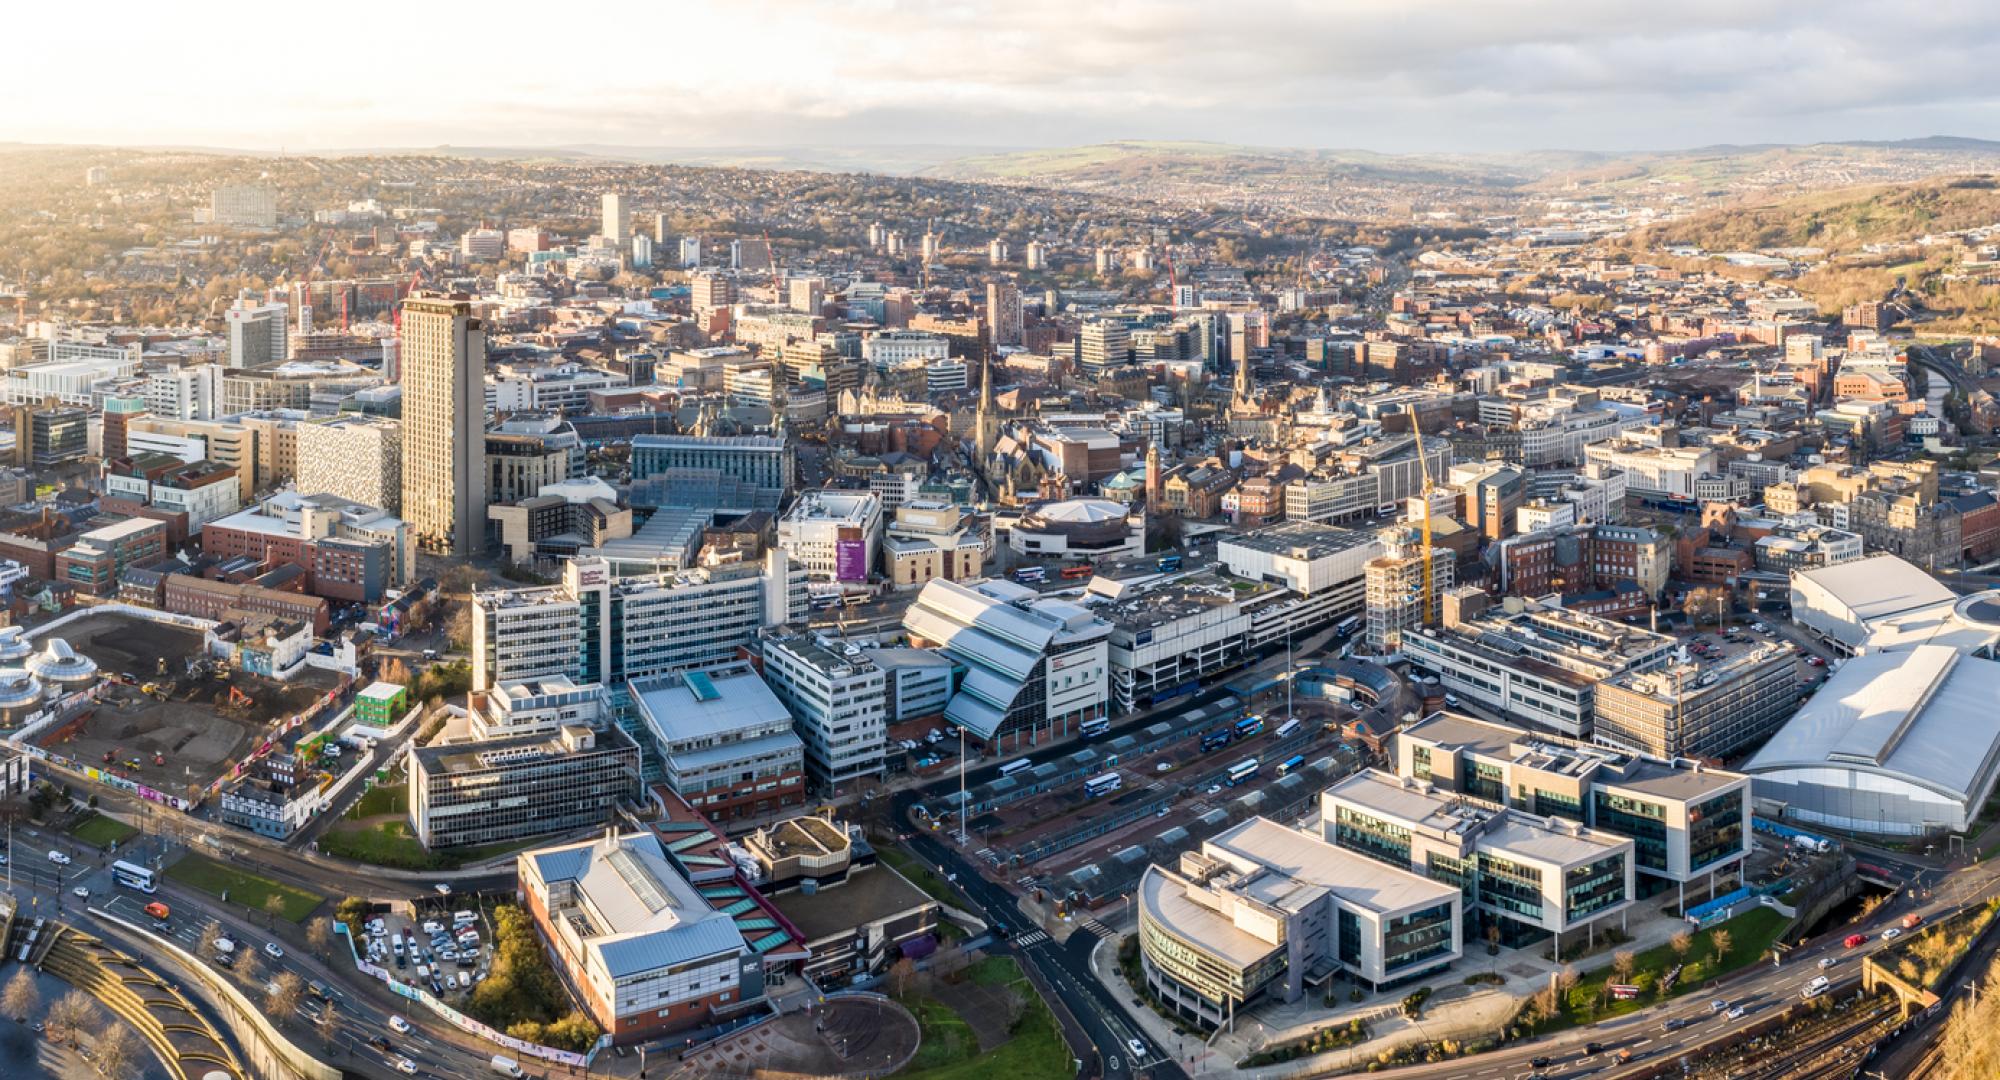 Aerial view of Sheffield city centre skyline at sunset